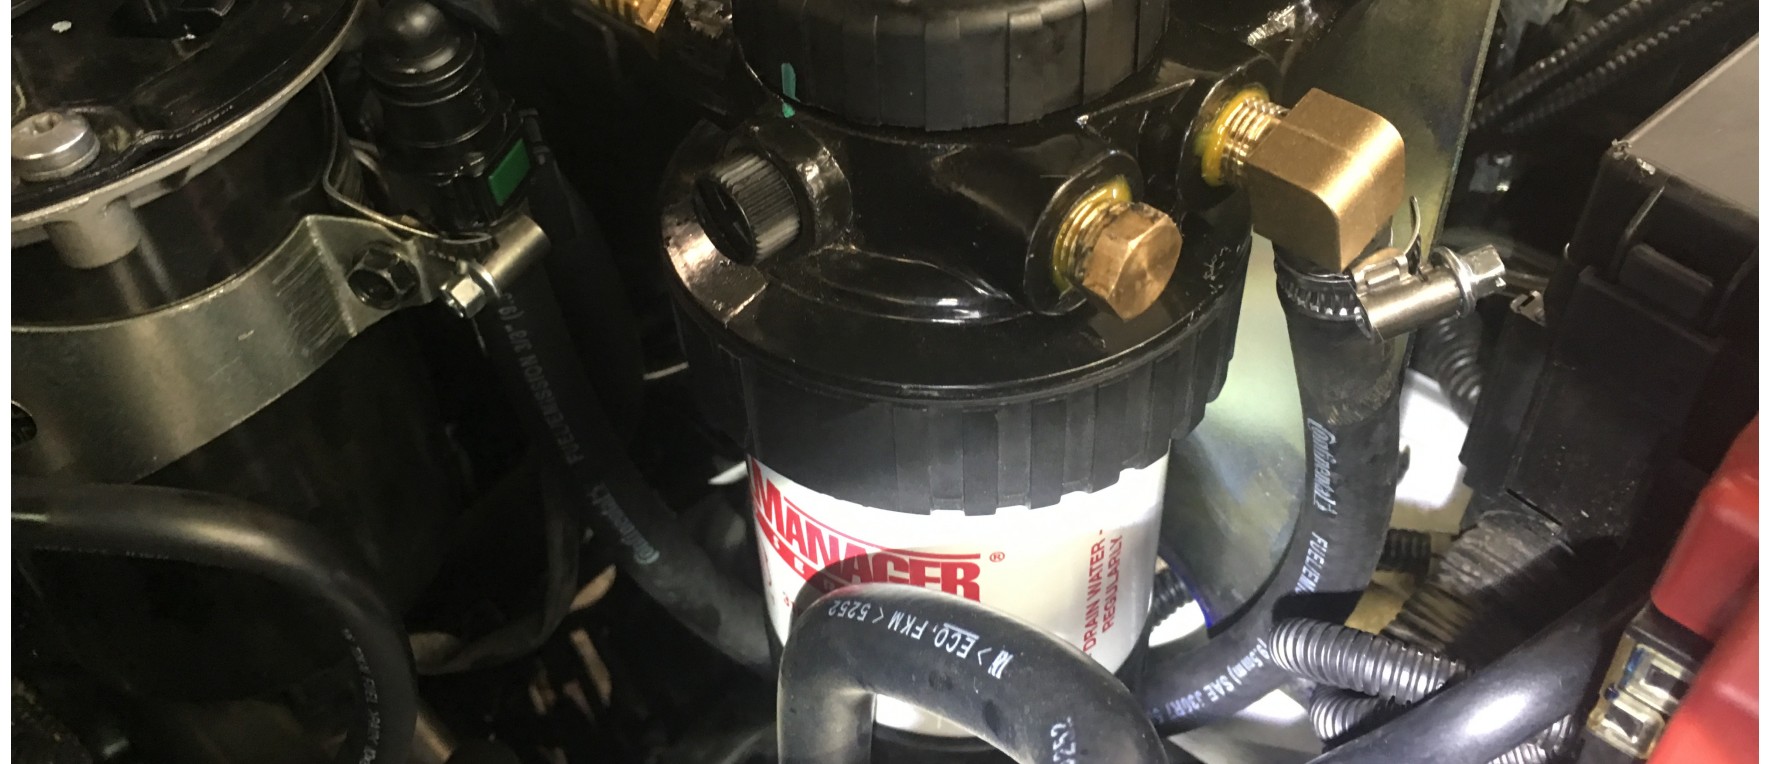 Replacing the fuel filter